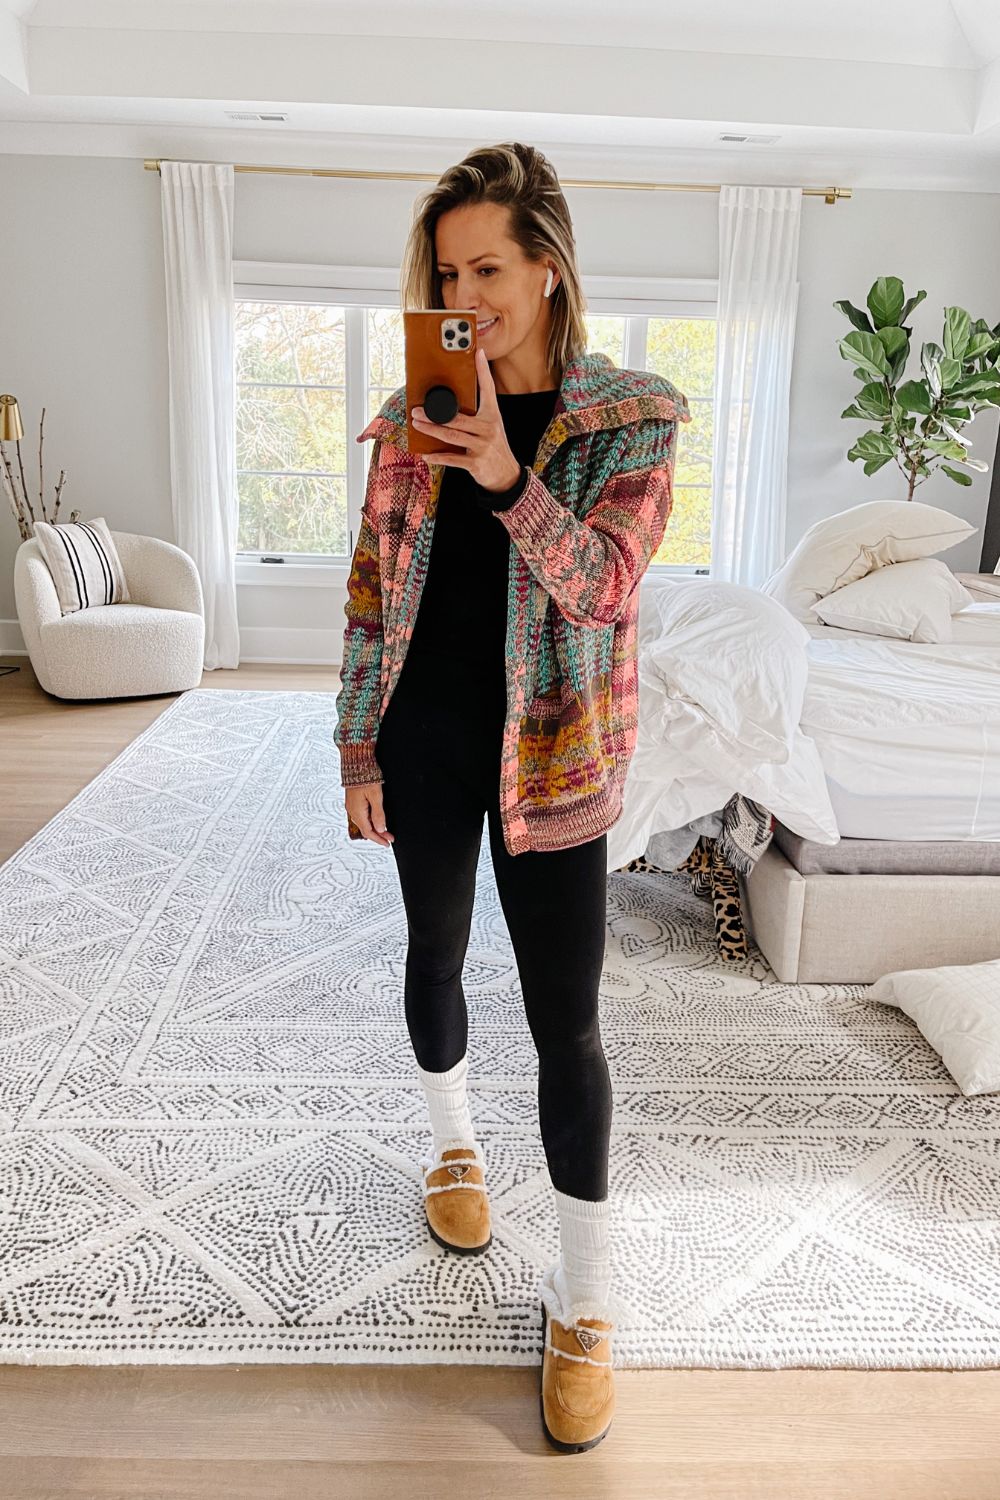 Suzanne wearing an Anthropology cardigan and leggings